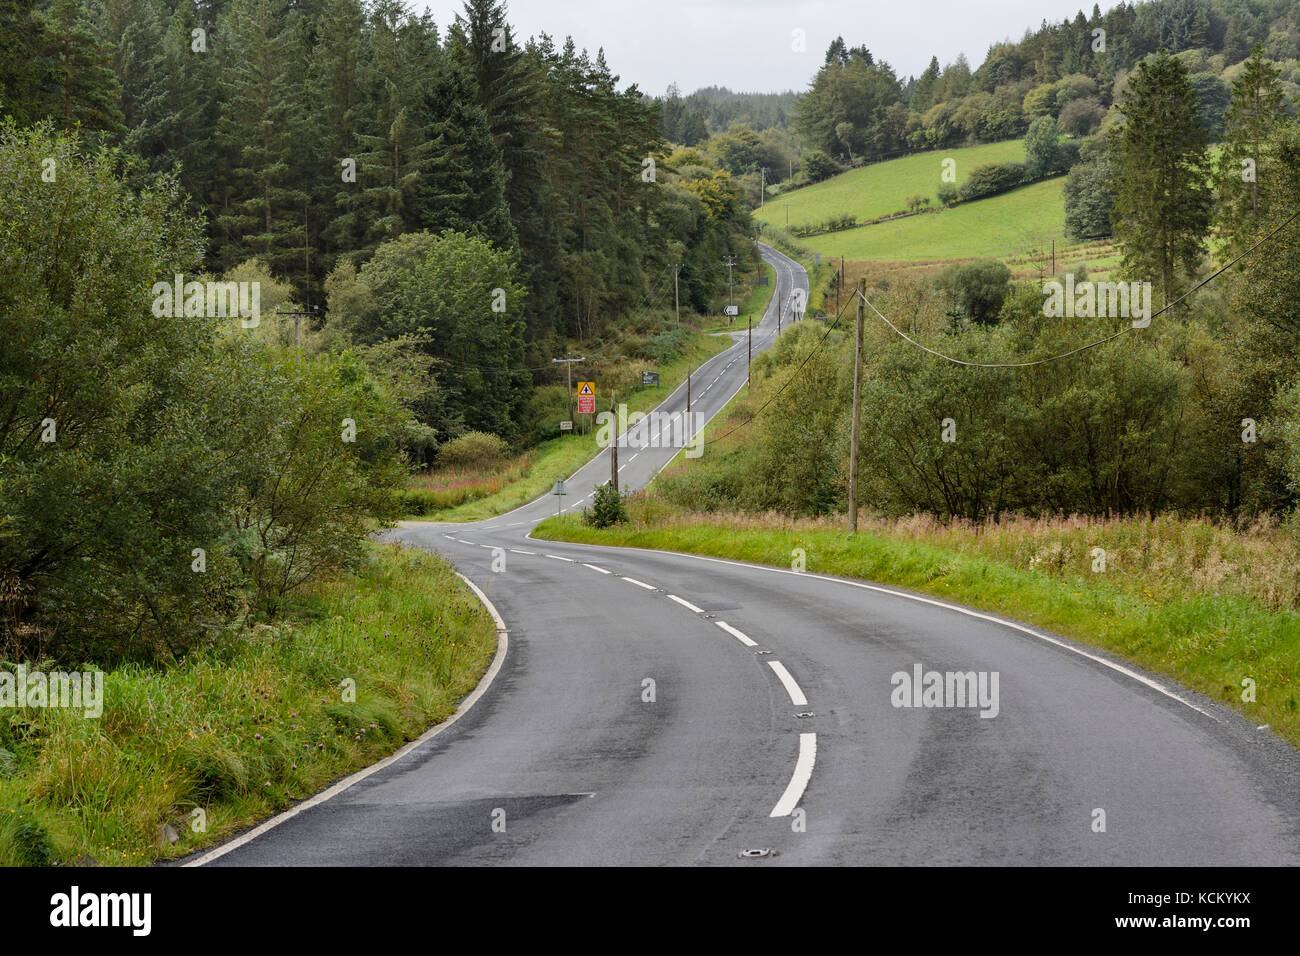 The B5105 road running through Clocaenog Forest between Rhuthun and Cerrig y Druidion in Clwyd, North Wales. Clocaenog Forest is a large scenic forest Stock Photo